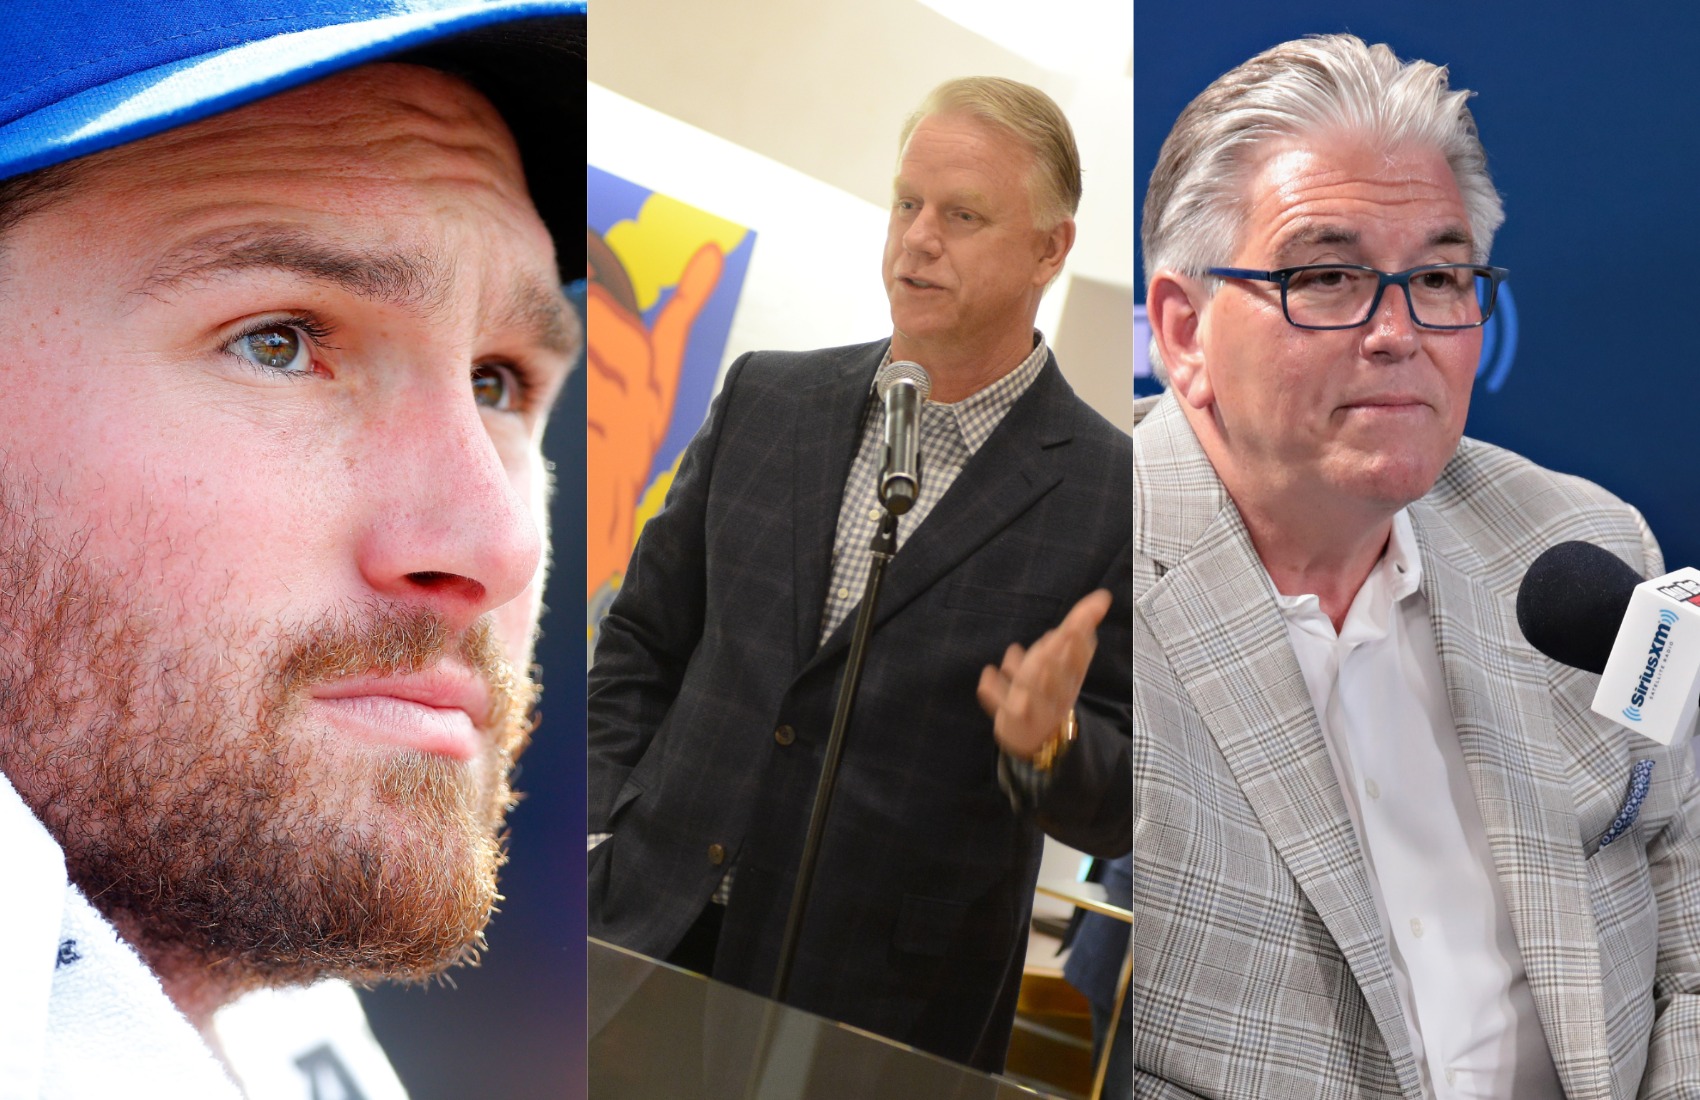 Former New York Mets second baseman Daniel Murphy (left) clashed with New York radio hosts Boomer Esiason (middle) and Mike Francesa when Murphy went on paternity leave.